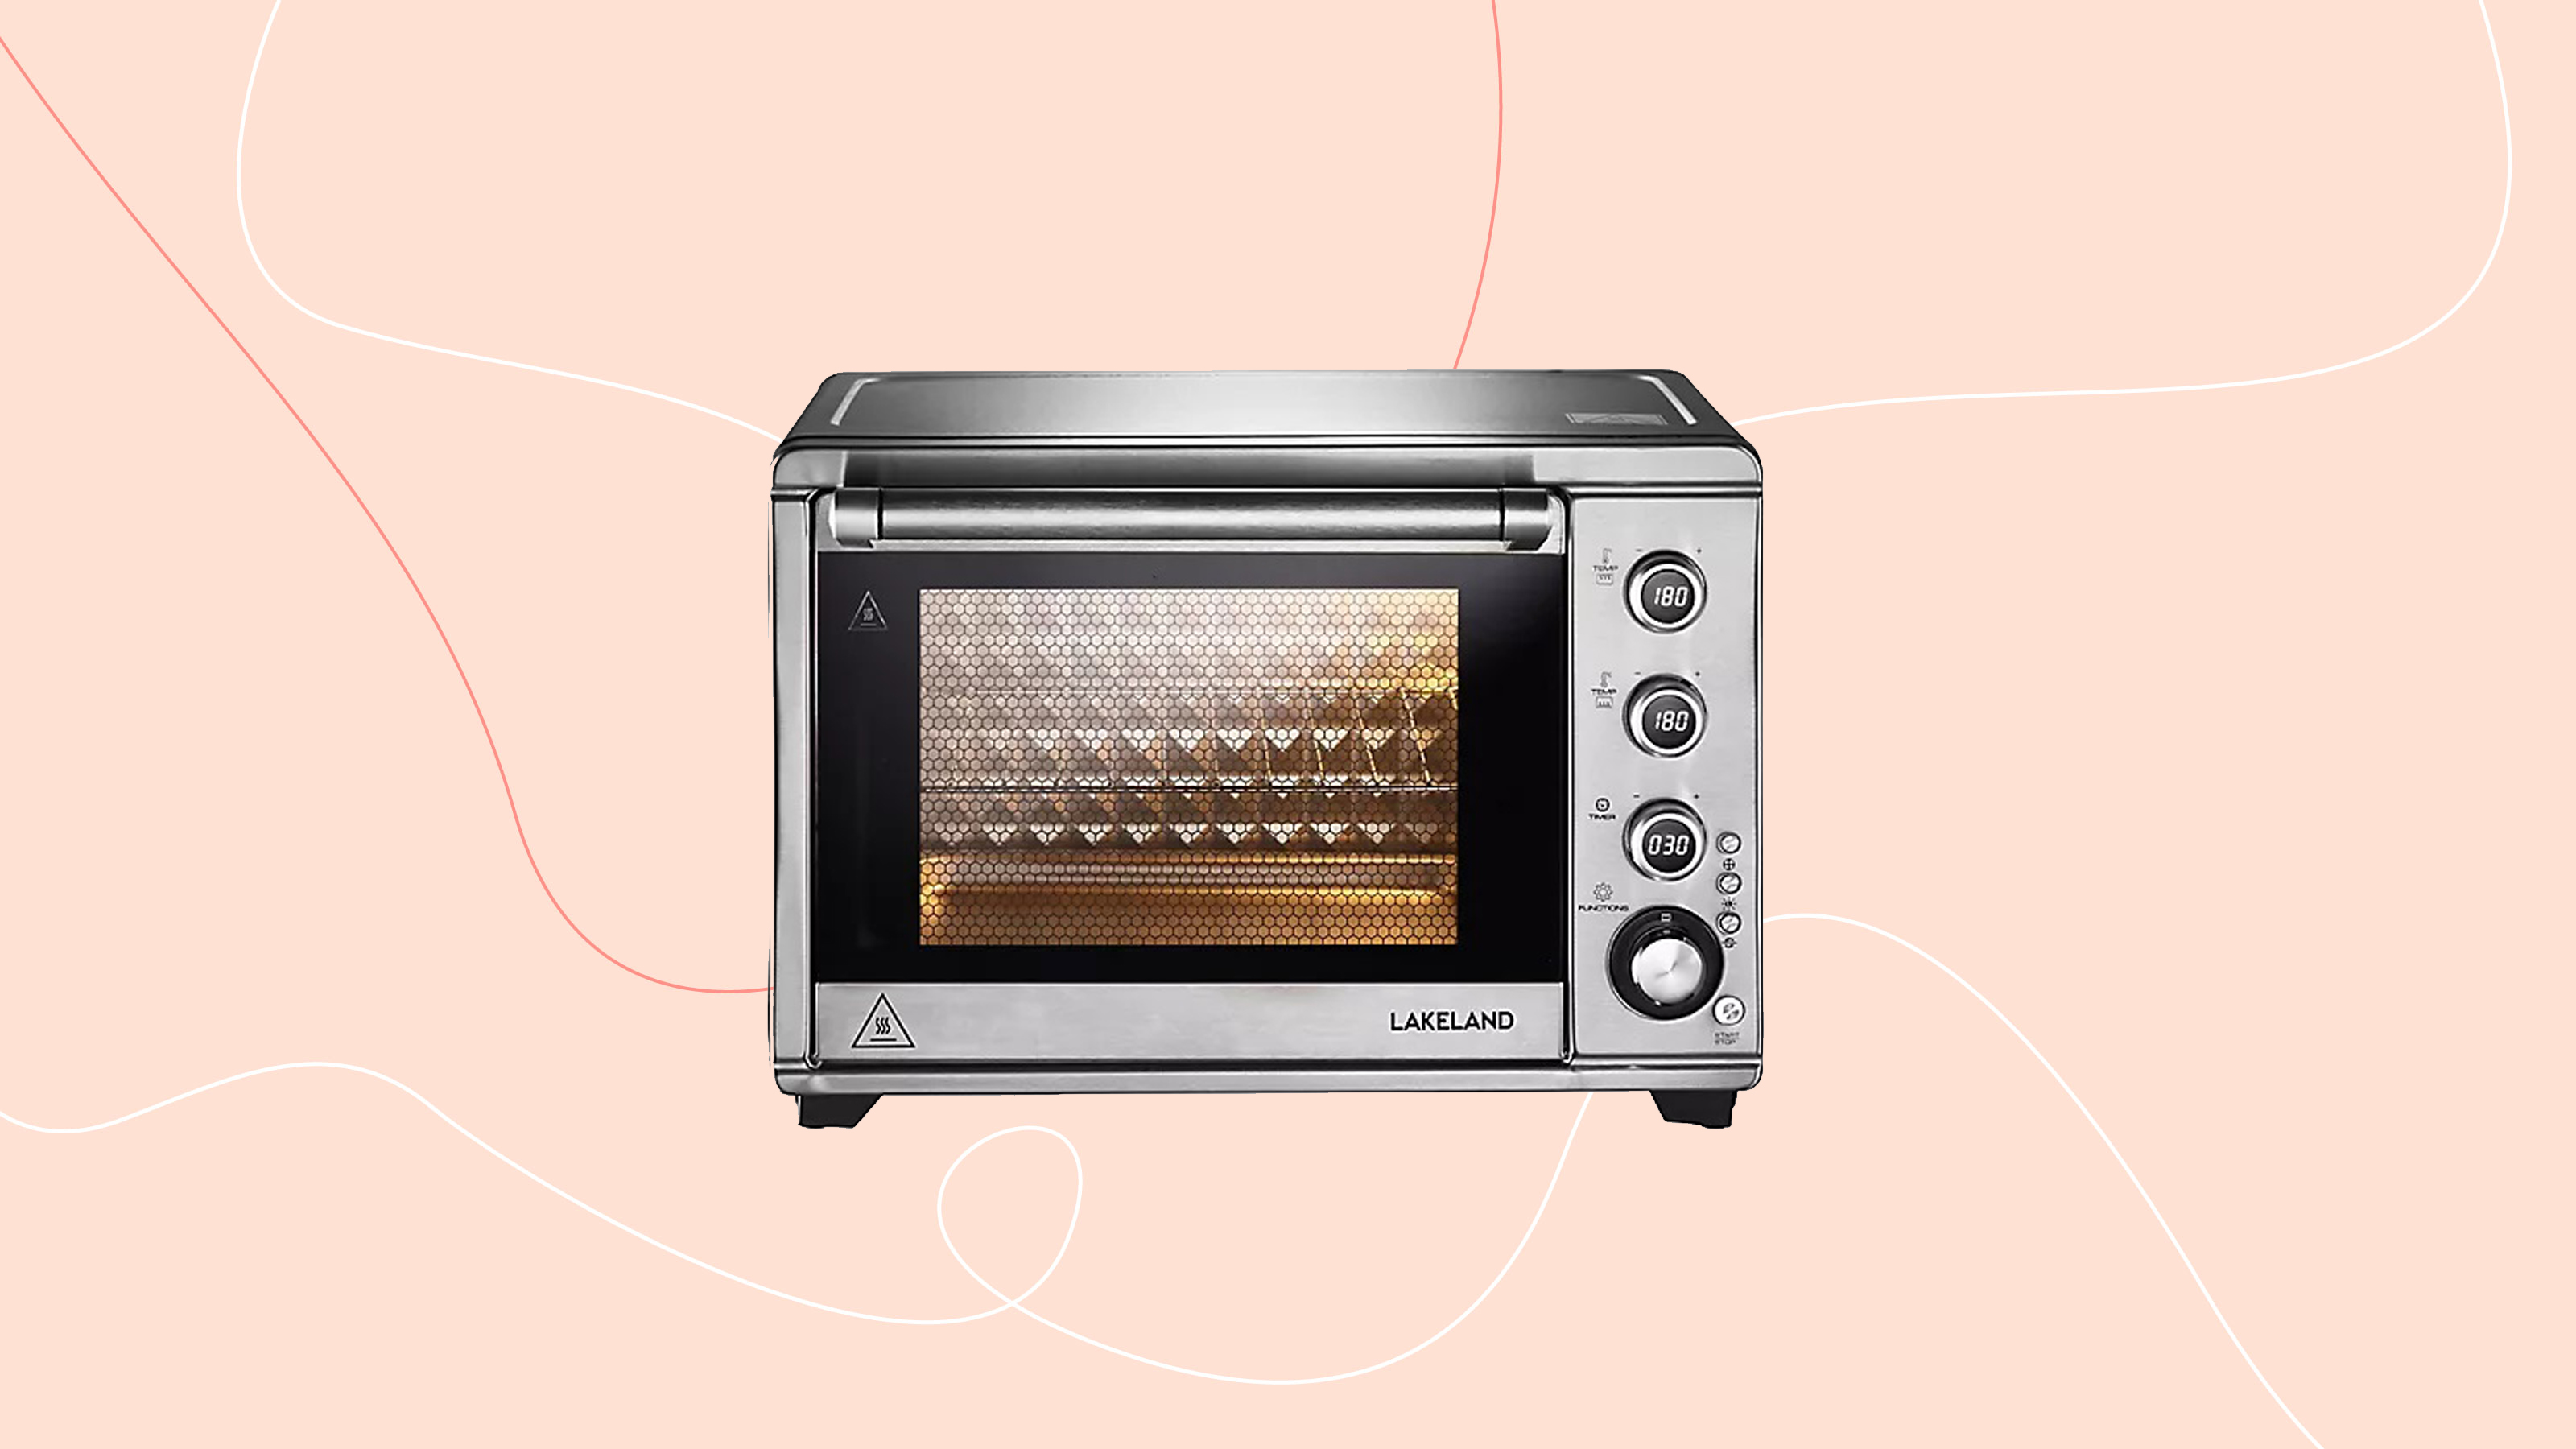 Lidl's microwave grill is almost identical to Lakeland's